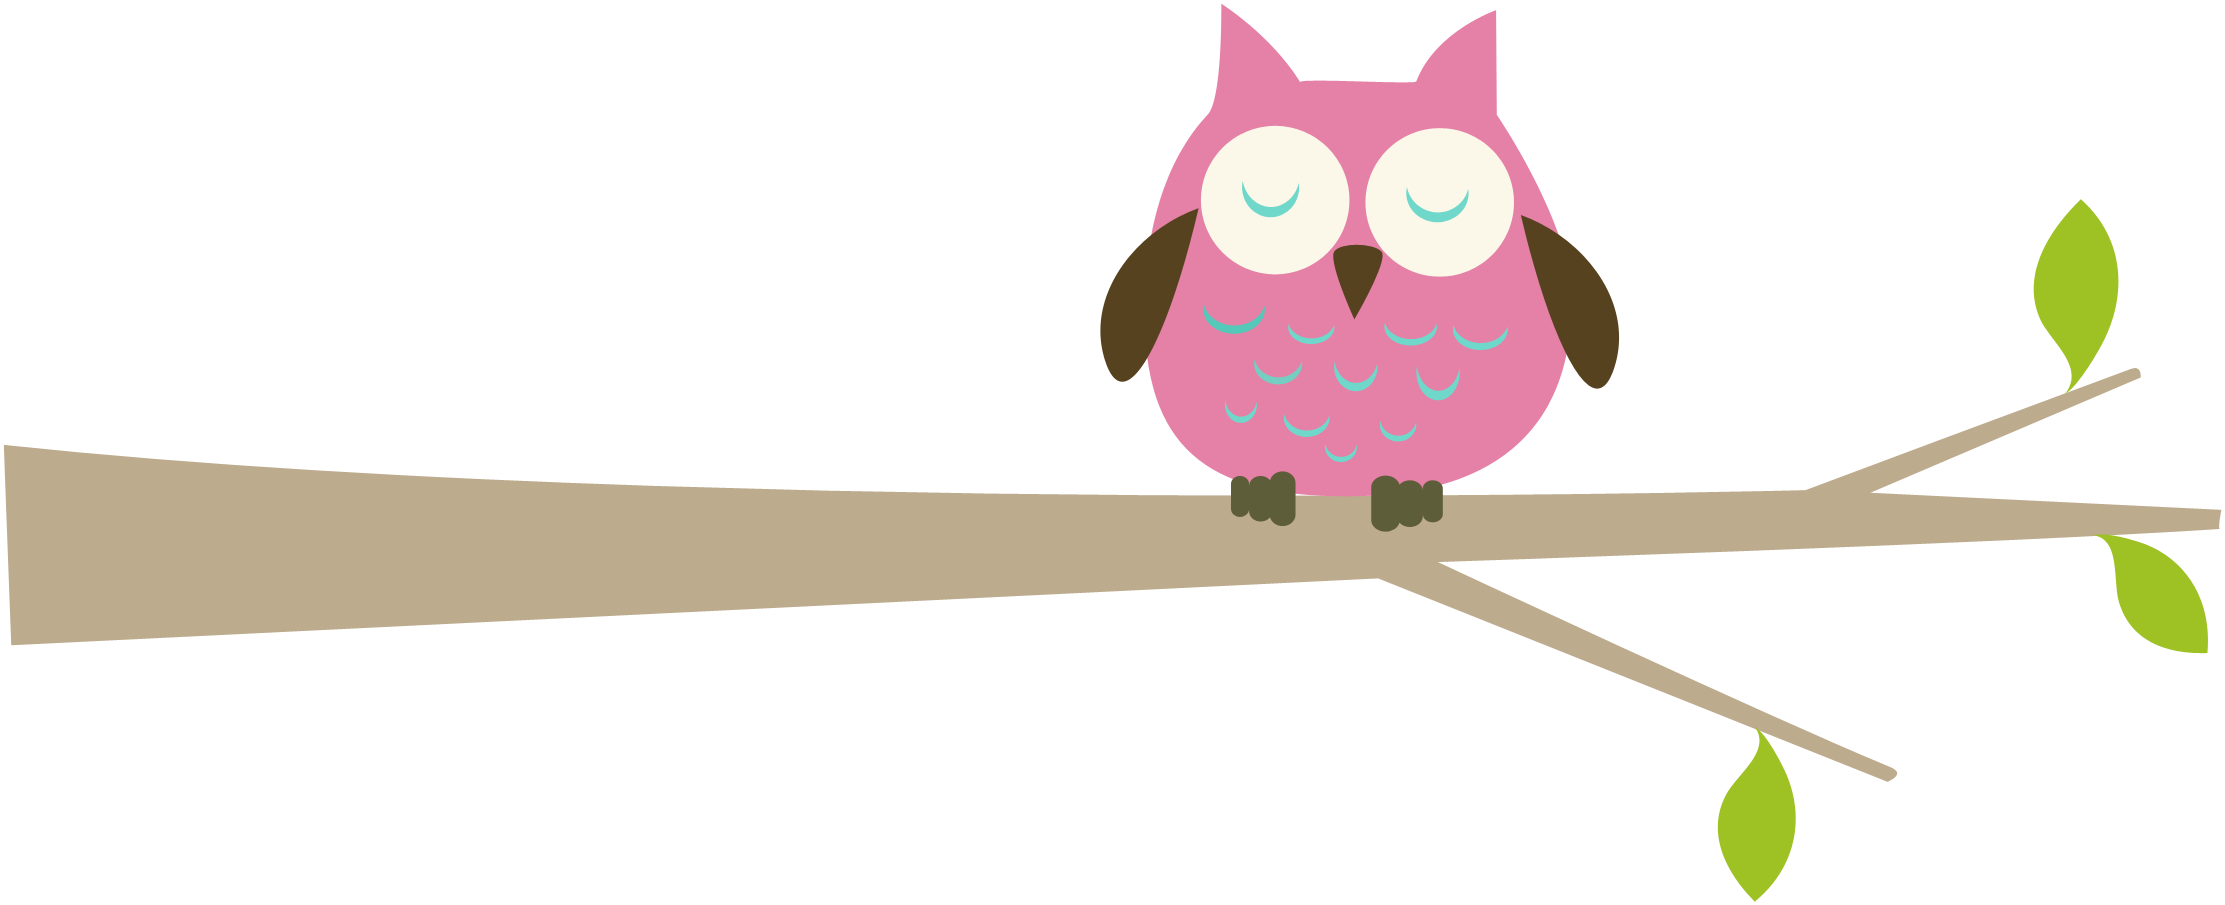 free clipart of owl - photo #40